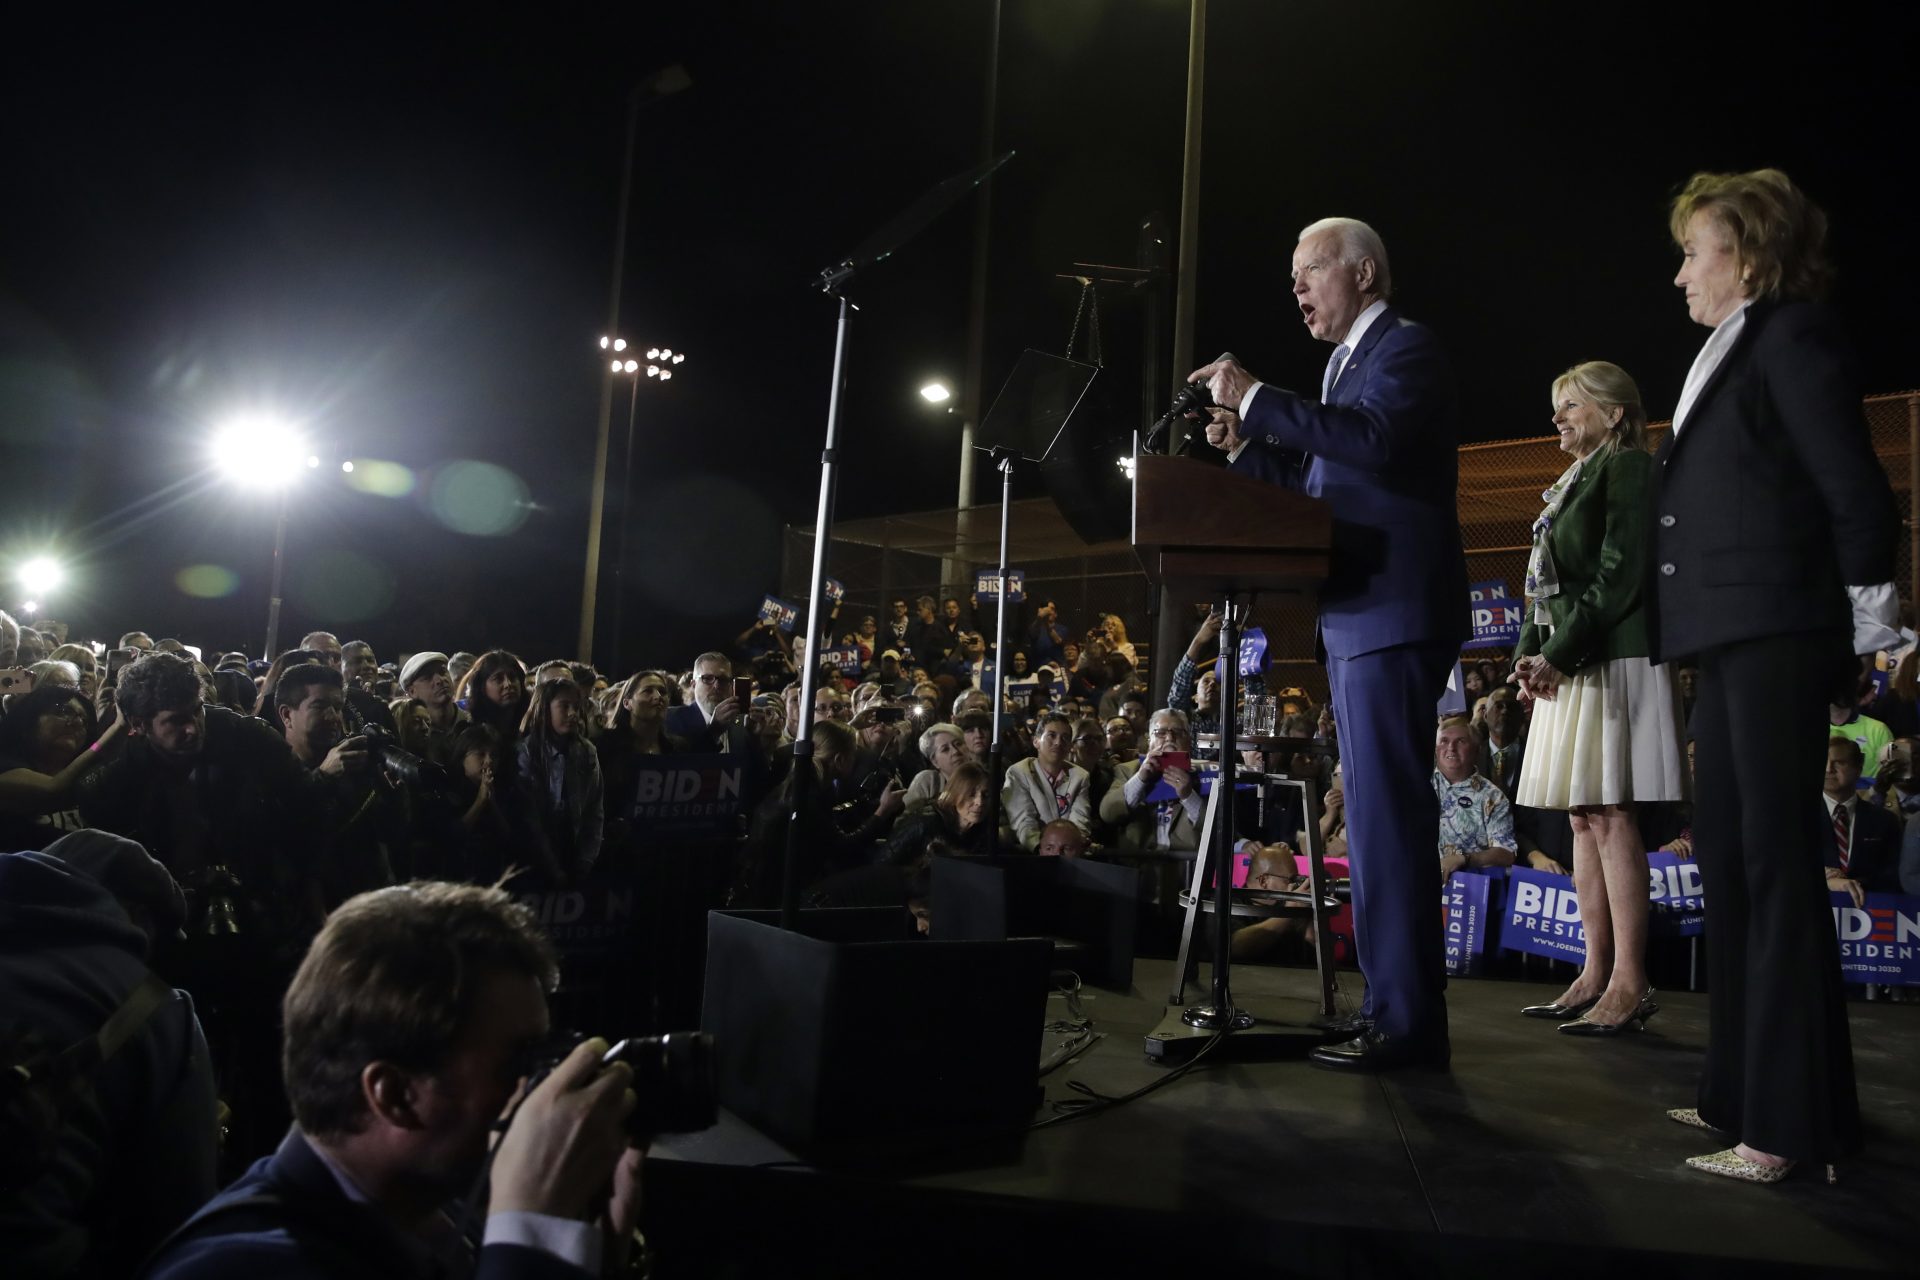 Democratic presidential candidate former Vice President Joe Biden, center, speaks in front of his sister Valerie, at right, and wife Jill, second from right, during a primary election night rally Tuesday, March 3, 2020, in Los Angeles